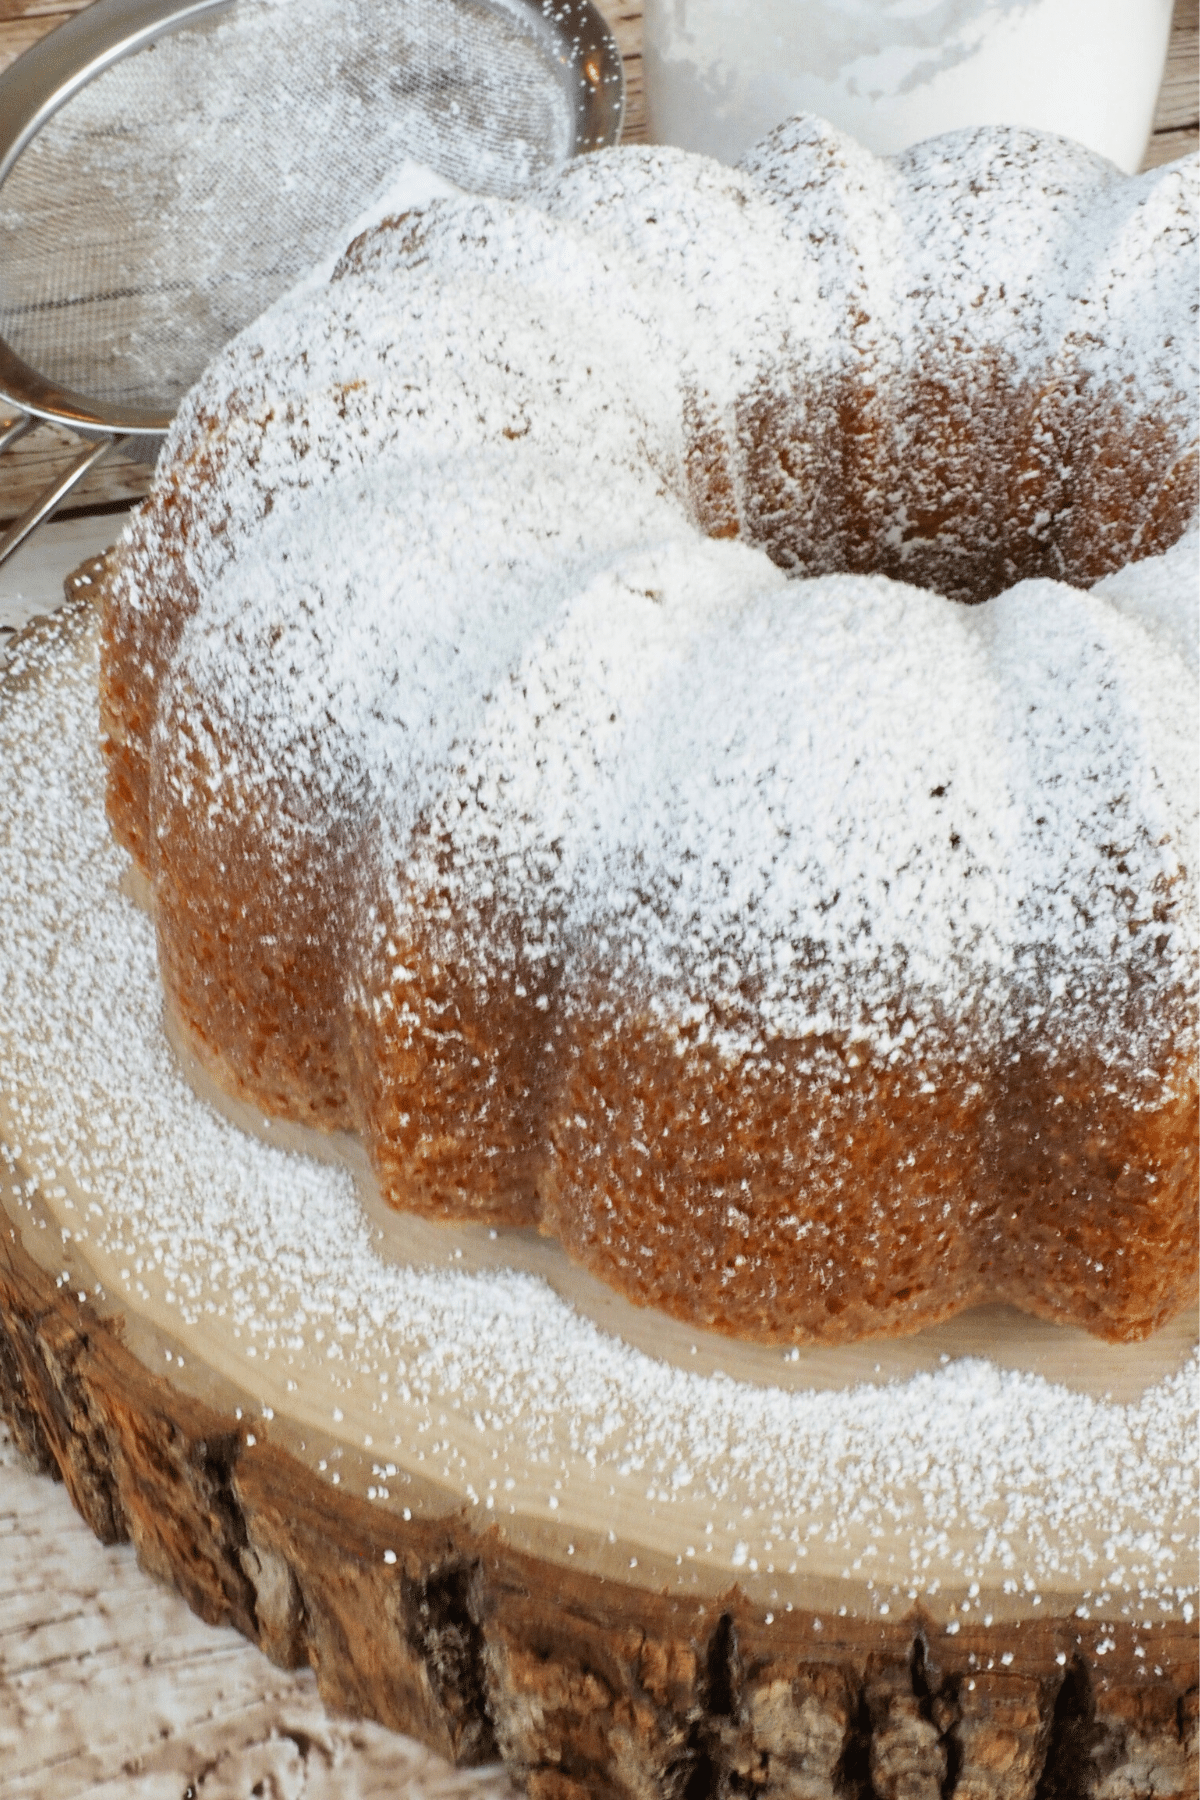 Dust the Kentucky Butter Cake with powdered sugar if desired.